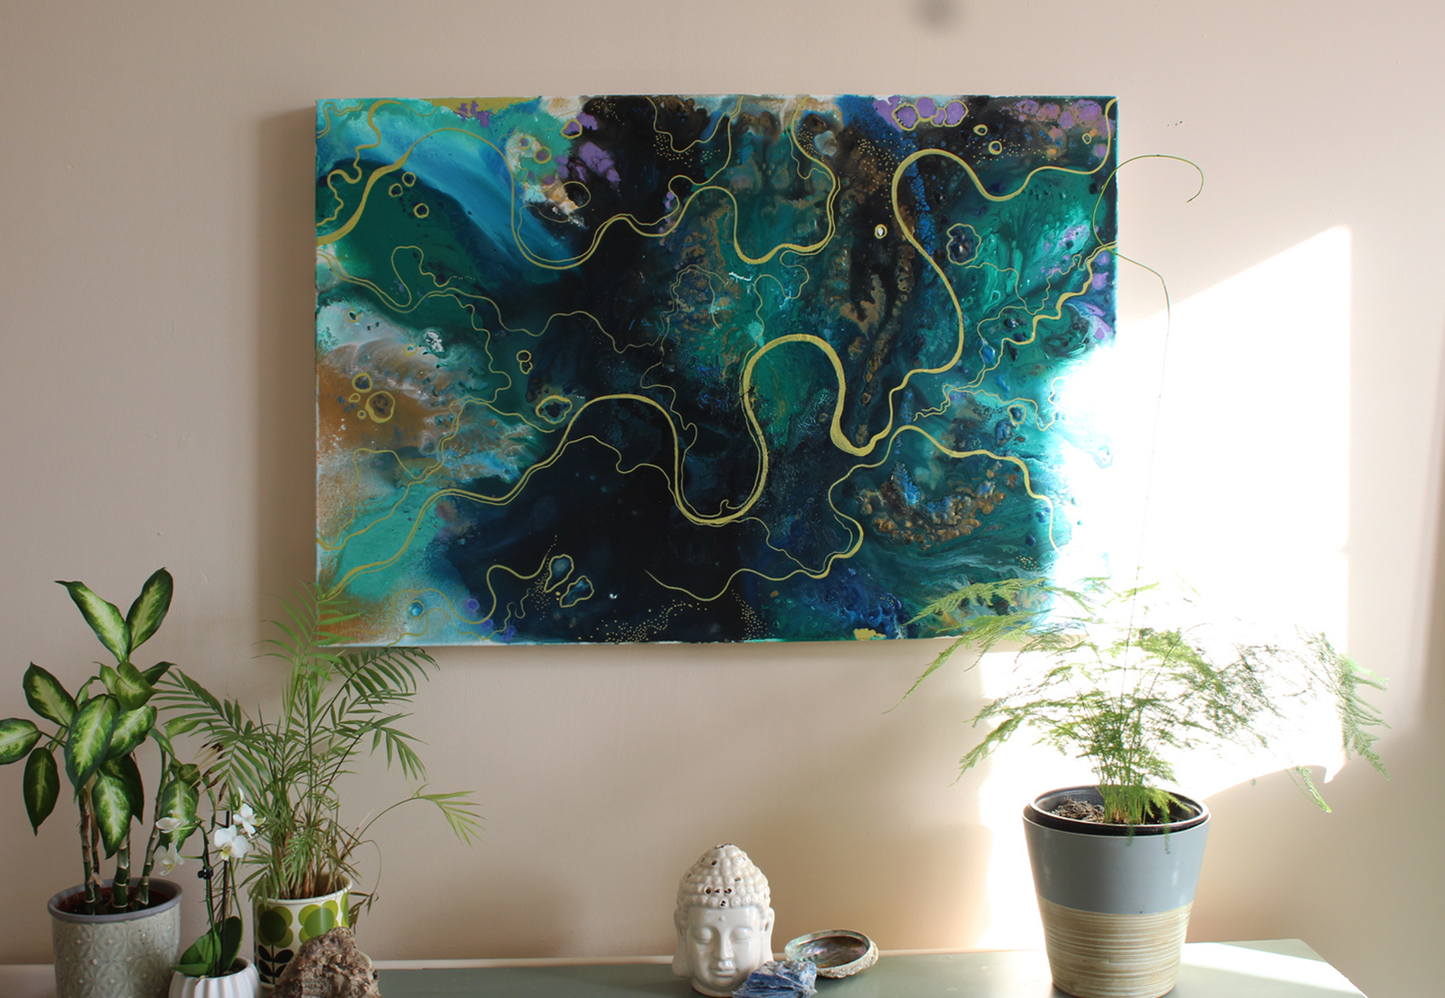 'All I have is a river' Original painting on canvas, 92x61cm